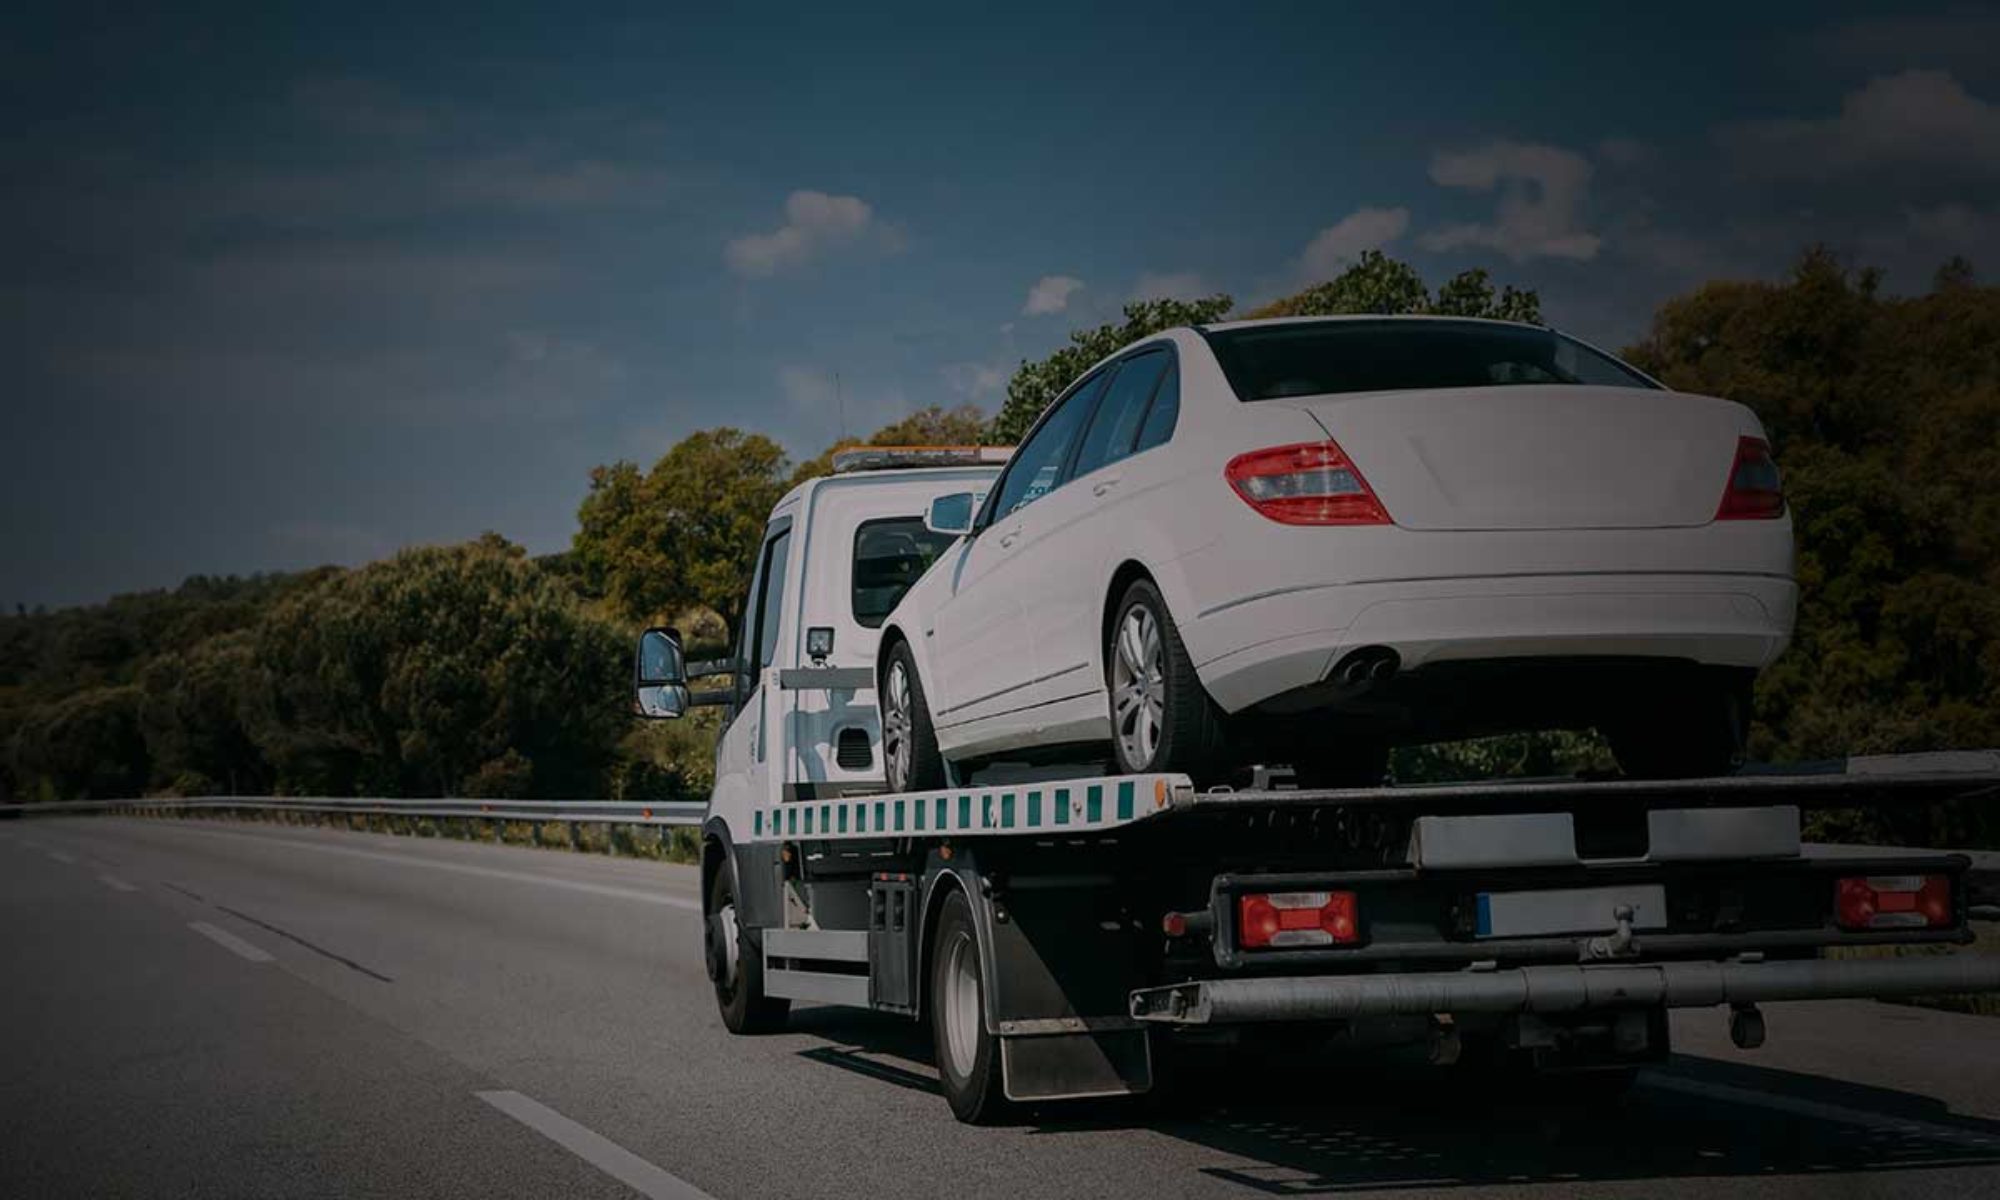 24/7 DFW Towing